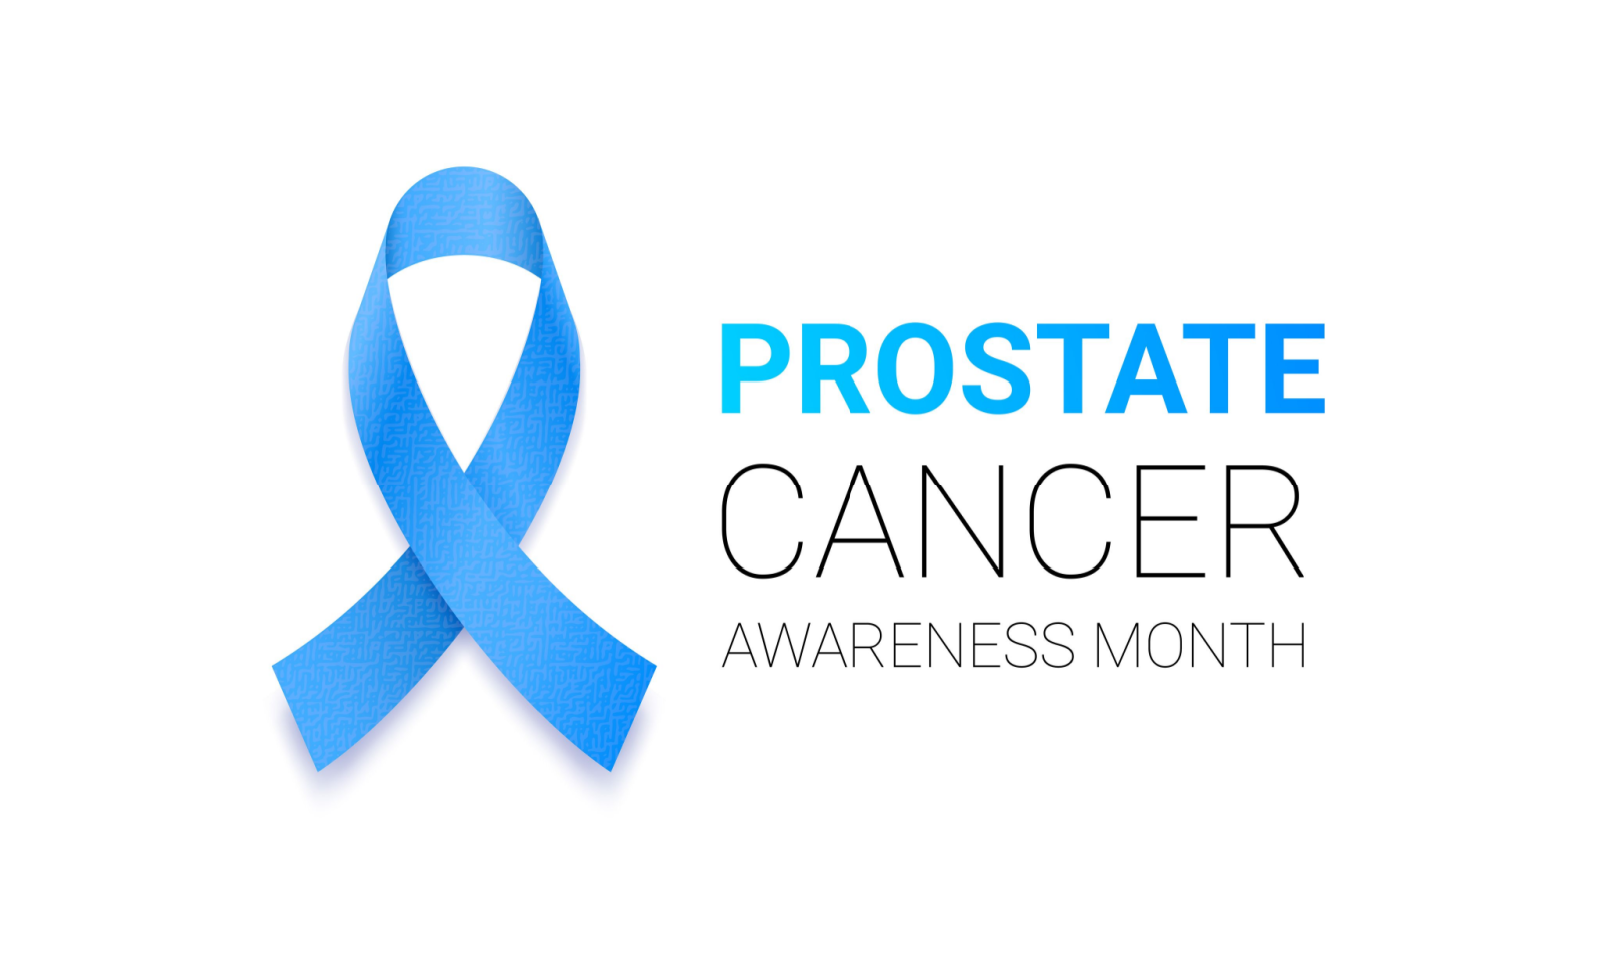 10 Simple Tips to Support Prostate Health! “An Ounce of Prevention is Worth a Pound of Cure”! Get a routine physical every year!; Prostate Cancer Awareness Month - Life Priority